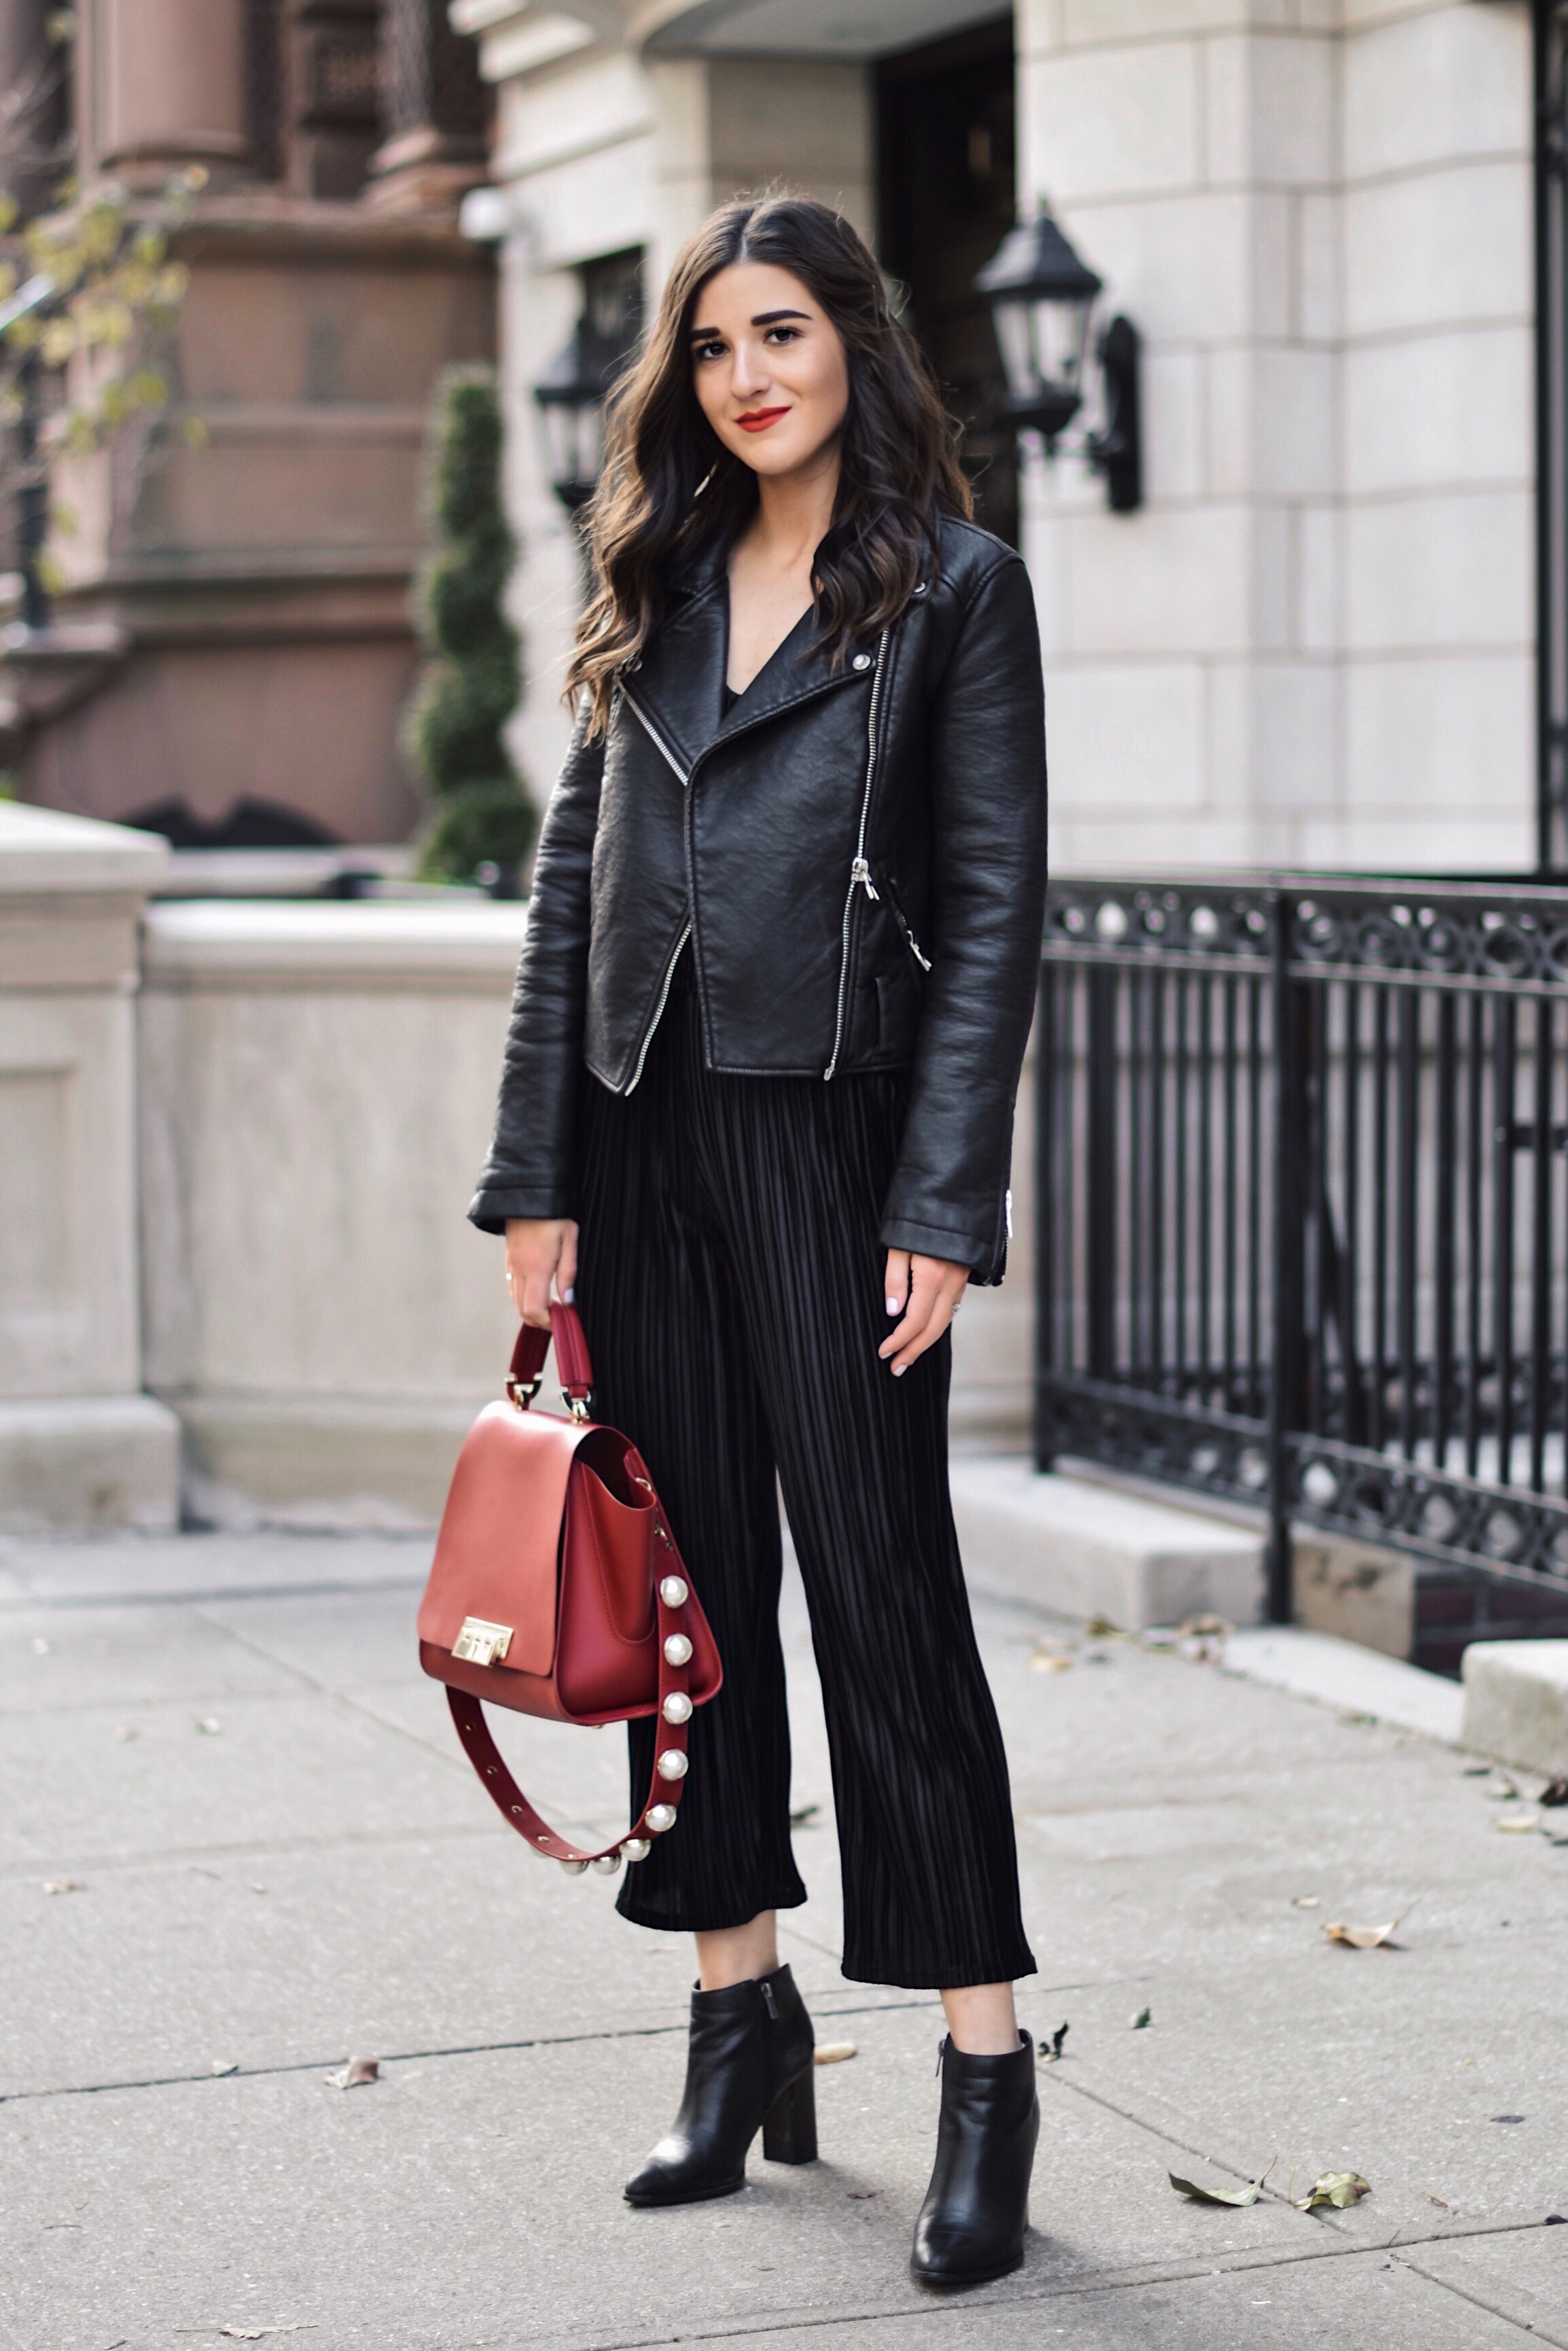 The Secret To Beating The Instagram Algorithm Black Velvet Set Leather Jacket Esther Santer Fashion Blog NYC Street Style Blogger Outfit OOTD Trendy All Black Monochrome Red Purse Zac Posen Bag Collaboration Booties Winter Fall Look Shopping Wear Buy.jpg